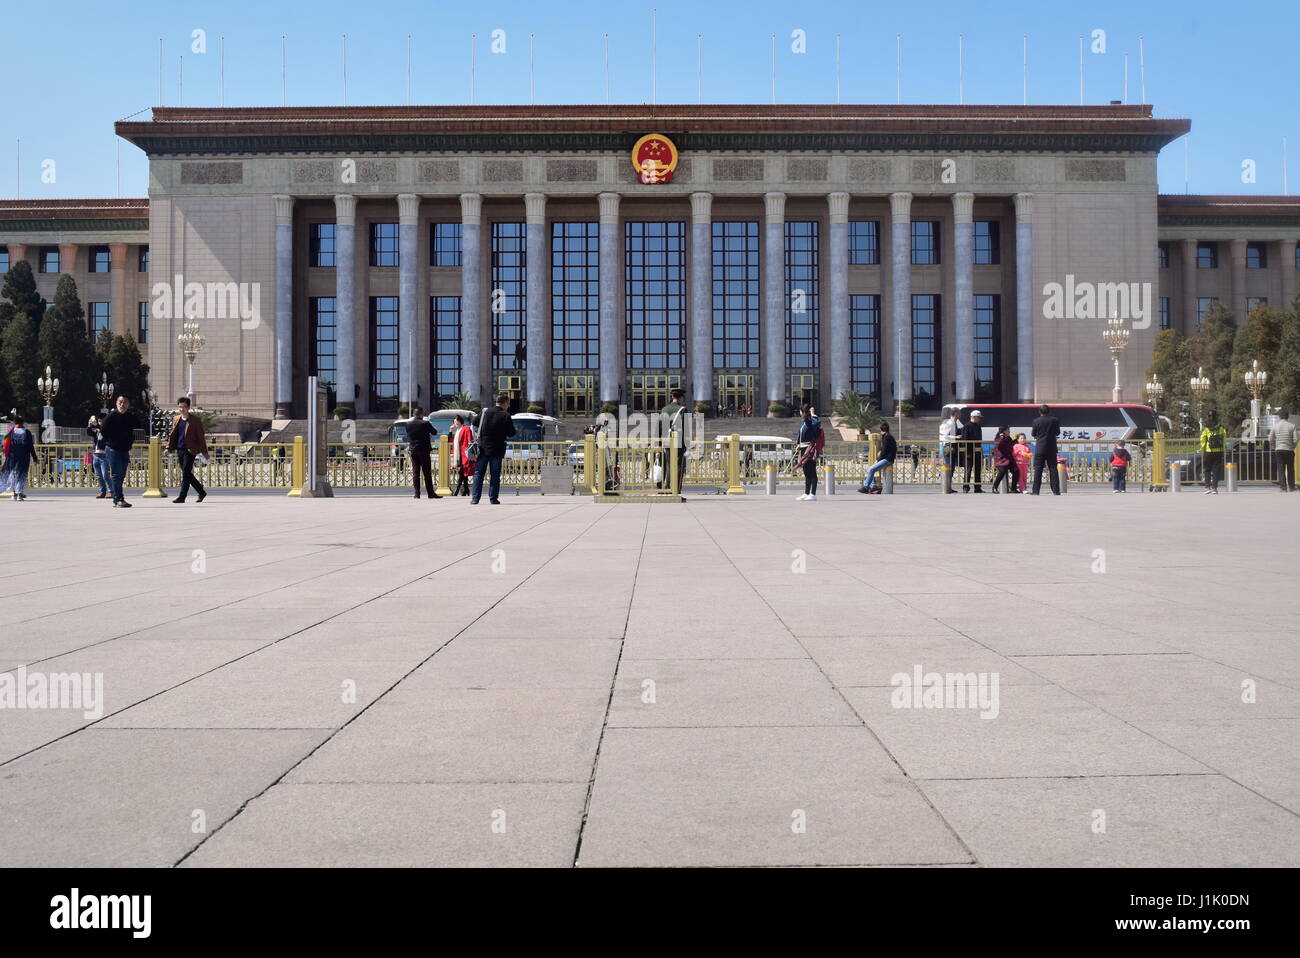 Great Hall of the People Chinese Congress facade by Tiananmen square, Beijing, under a clear blue sky Stock Photo